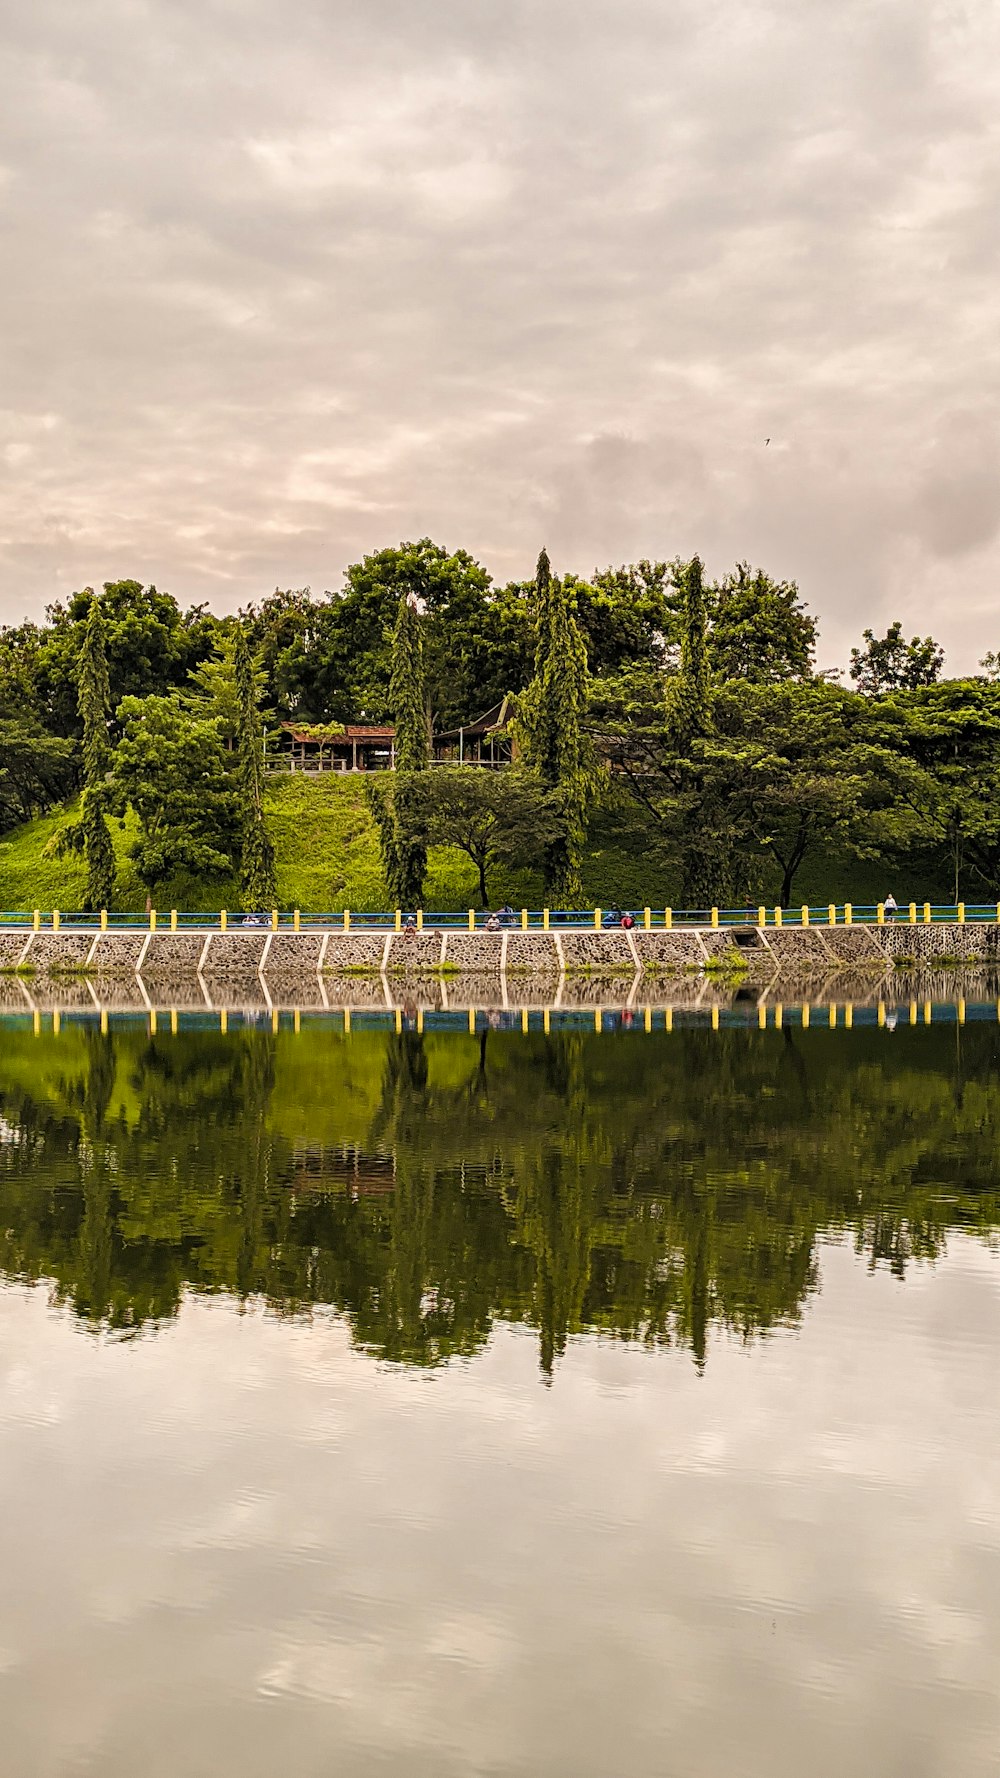 a bridge over a body of water with trees in the background